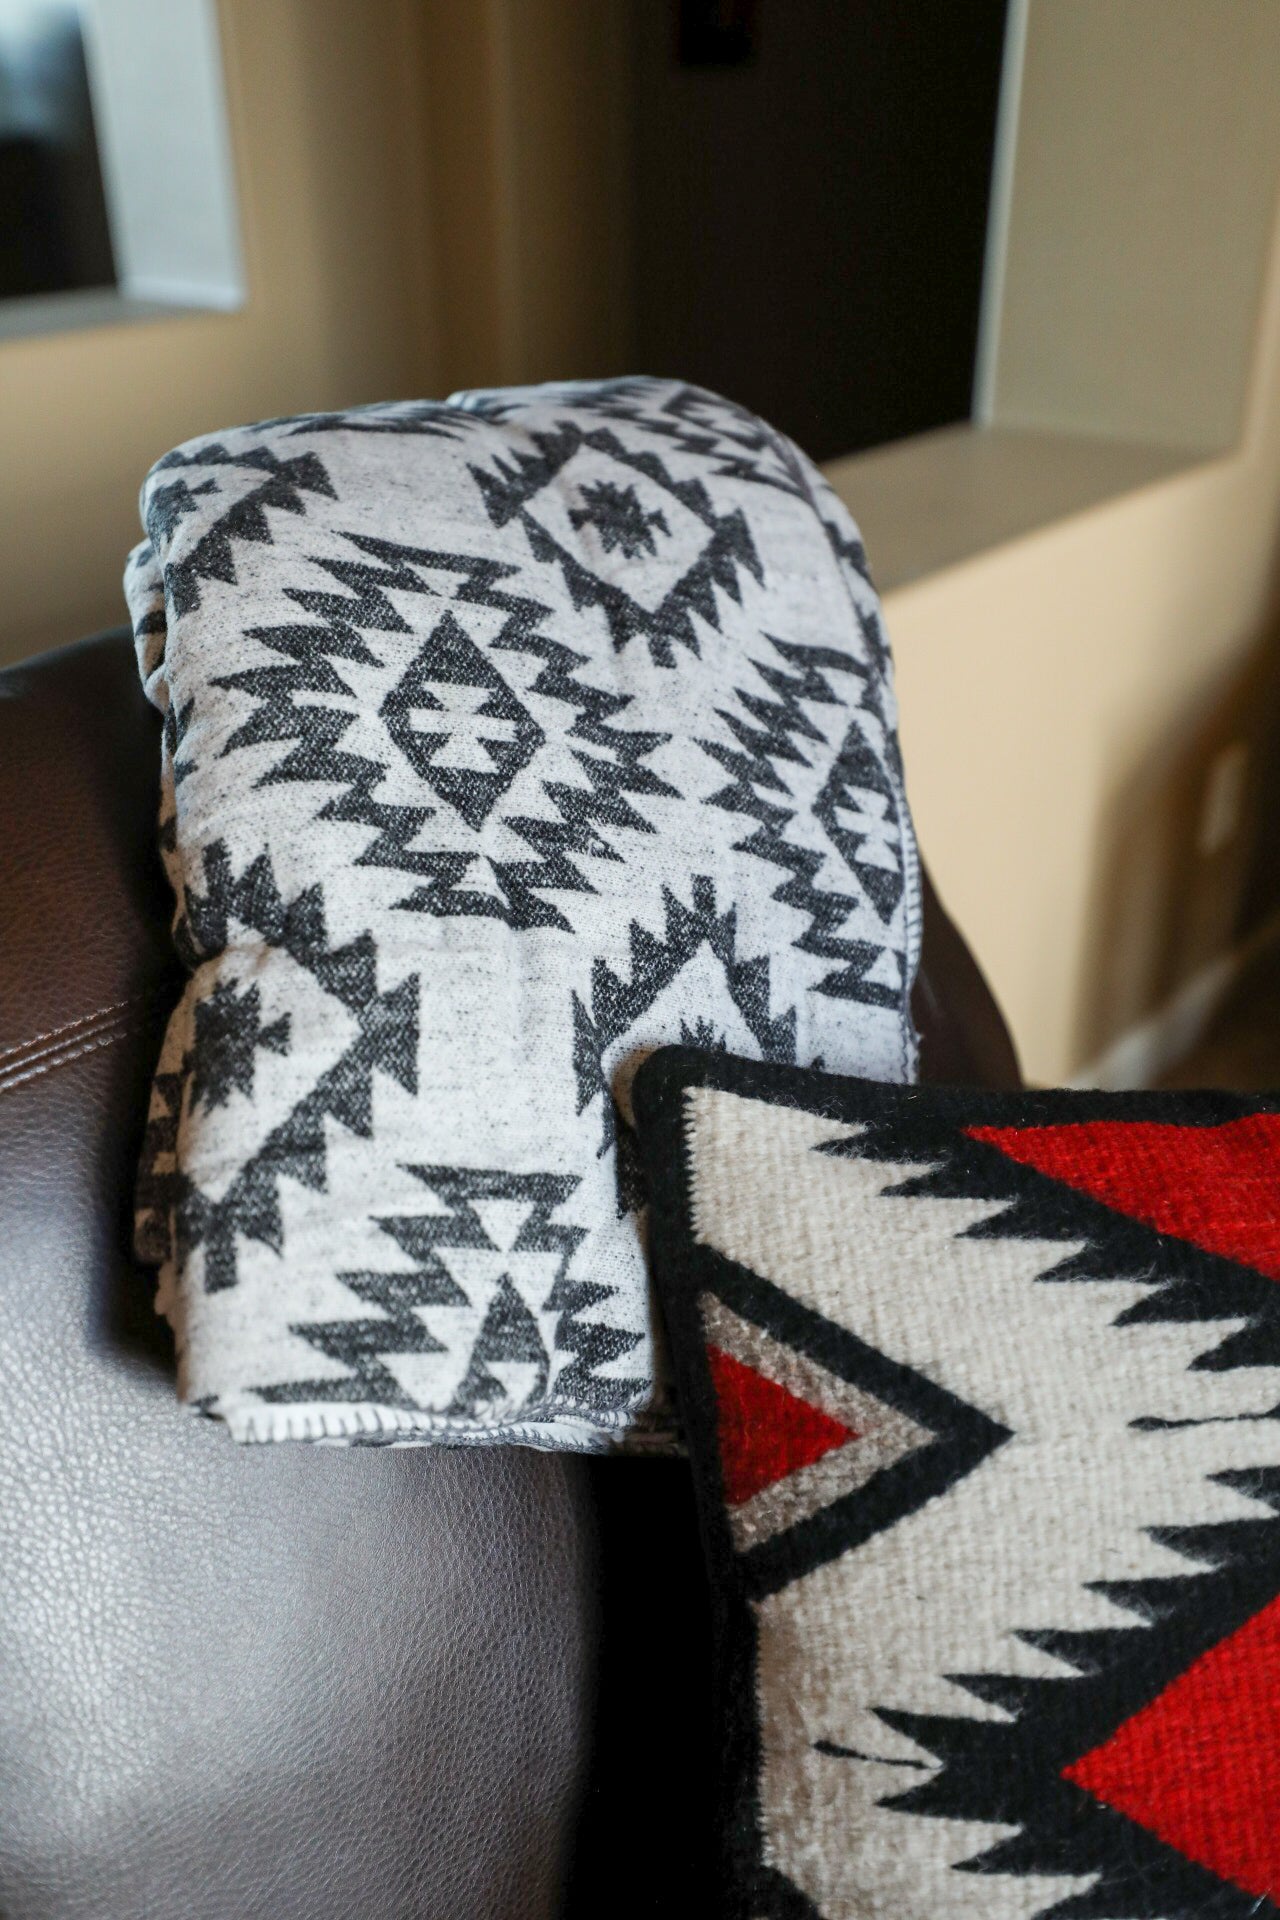 Aztec Throw-Home Goods-Crooked Horn Company, Online Women's Fashion Boutique in San Tan Valley, Arizona 85140